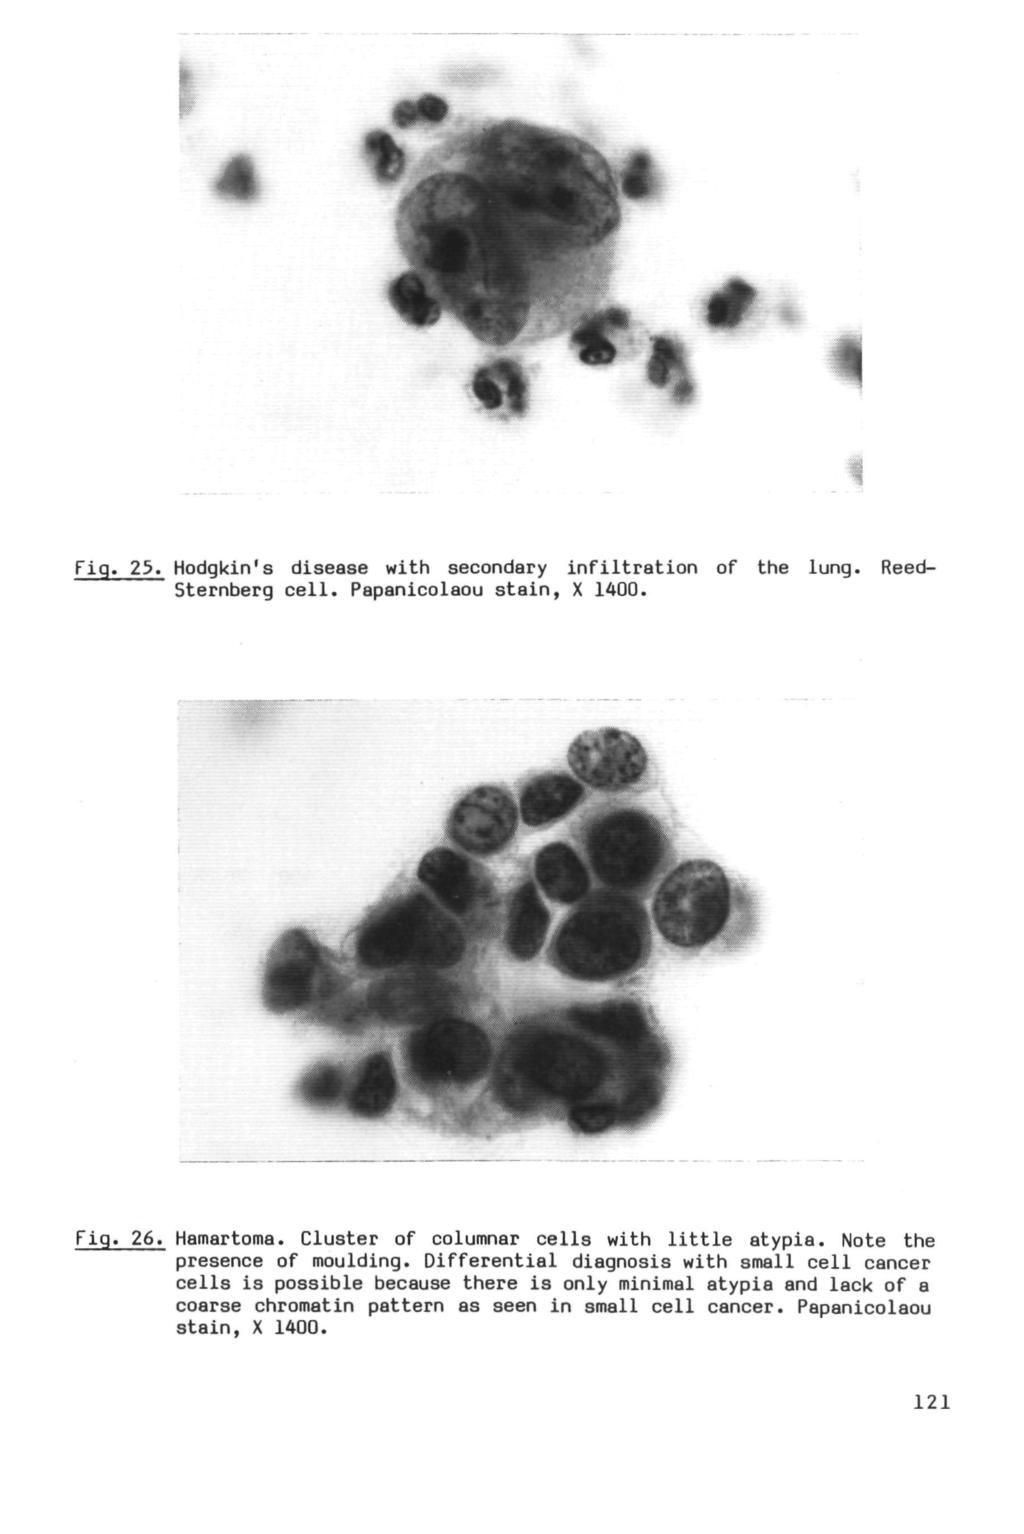 Fig. 25. Hodgkin's disease with secondary infiltration of the lung. Reed- Sternberg cell. Papanicolaou stain, X 1400. Fig. 26. Hamartoma. Cluster of columnar cells with little atypia.